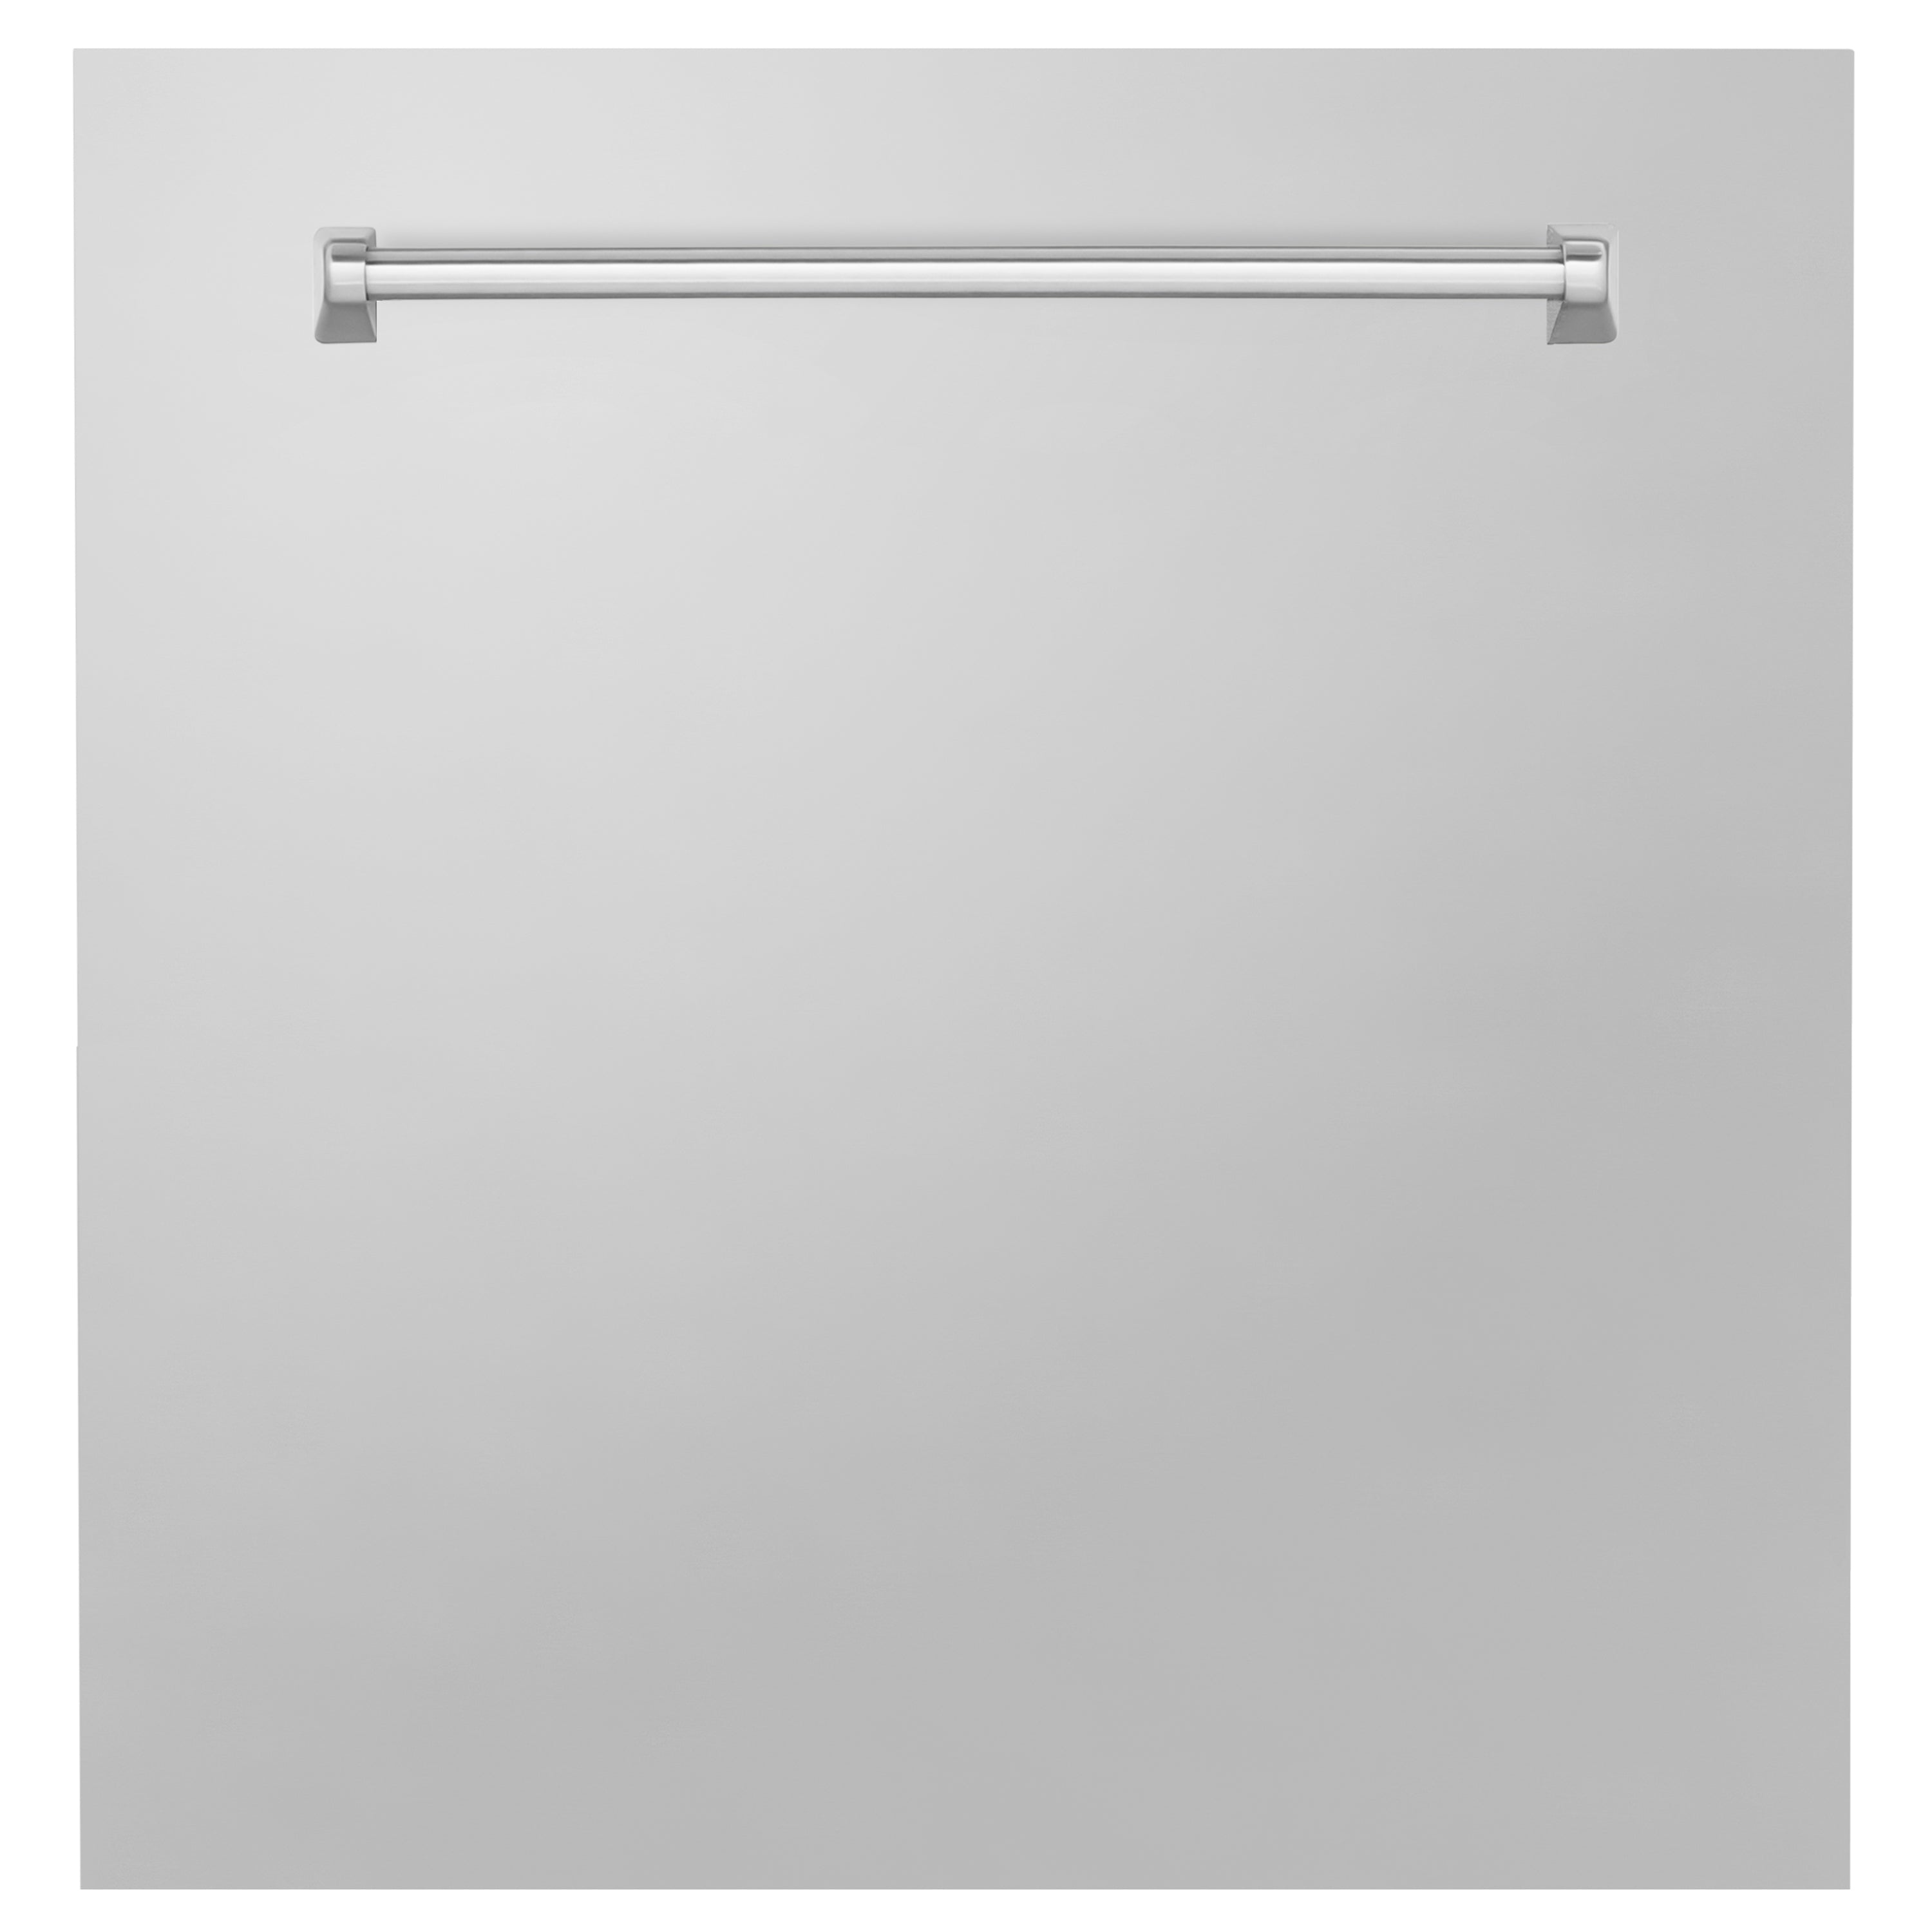 ZLINE 24" Monument Dishwasher Panel with Traditional Handle in Stainless Steel without Kickplate